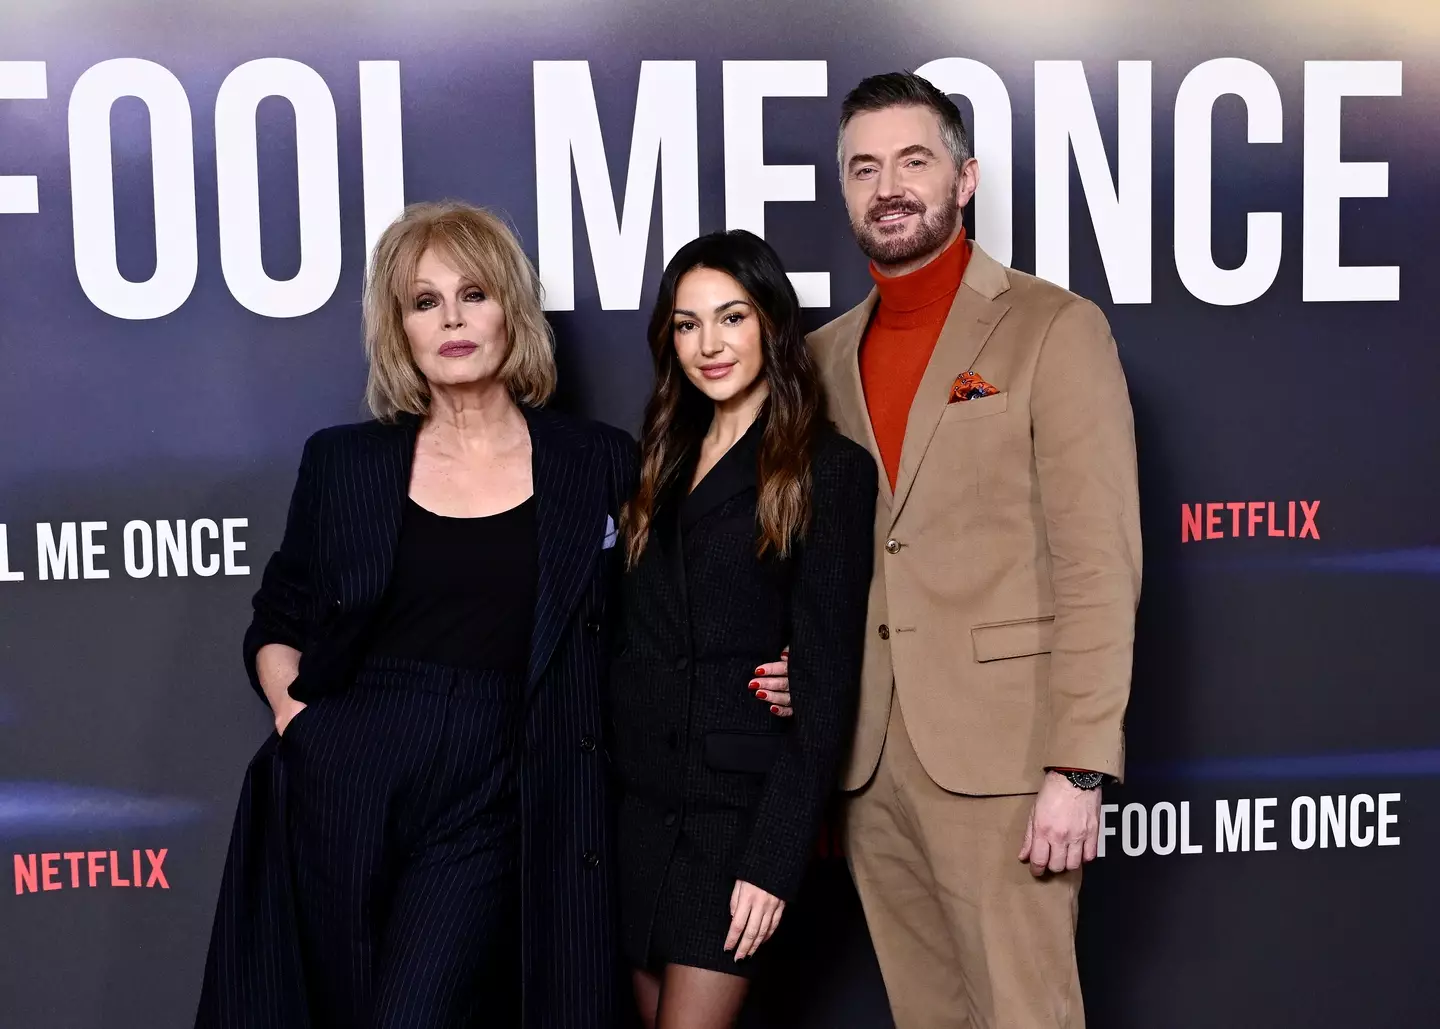 Joanna Lumley, Michelle Keegan and Richard Armitage star in Fool Me Once.